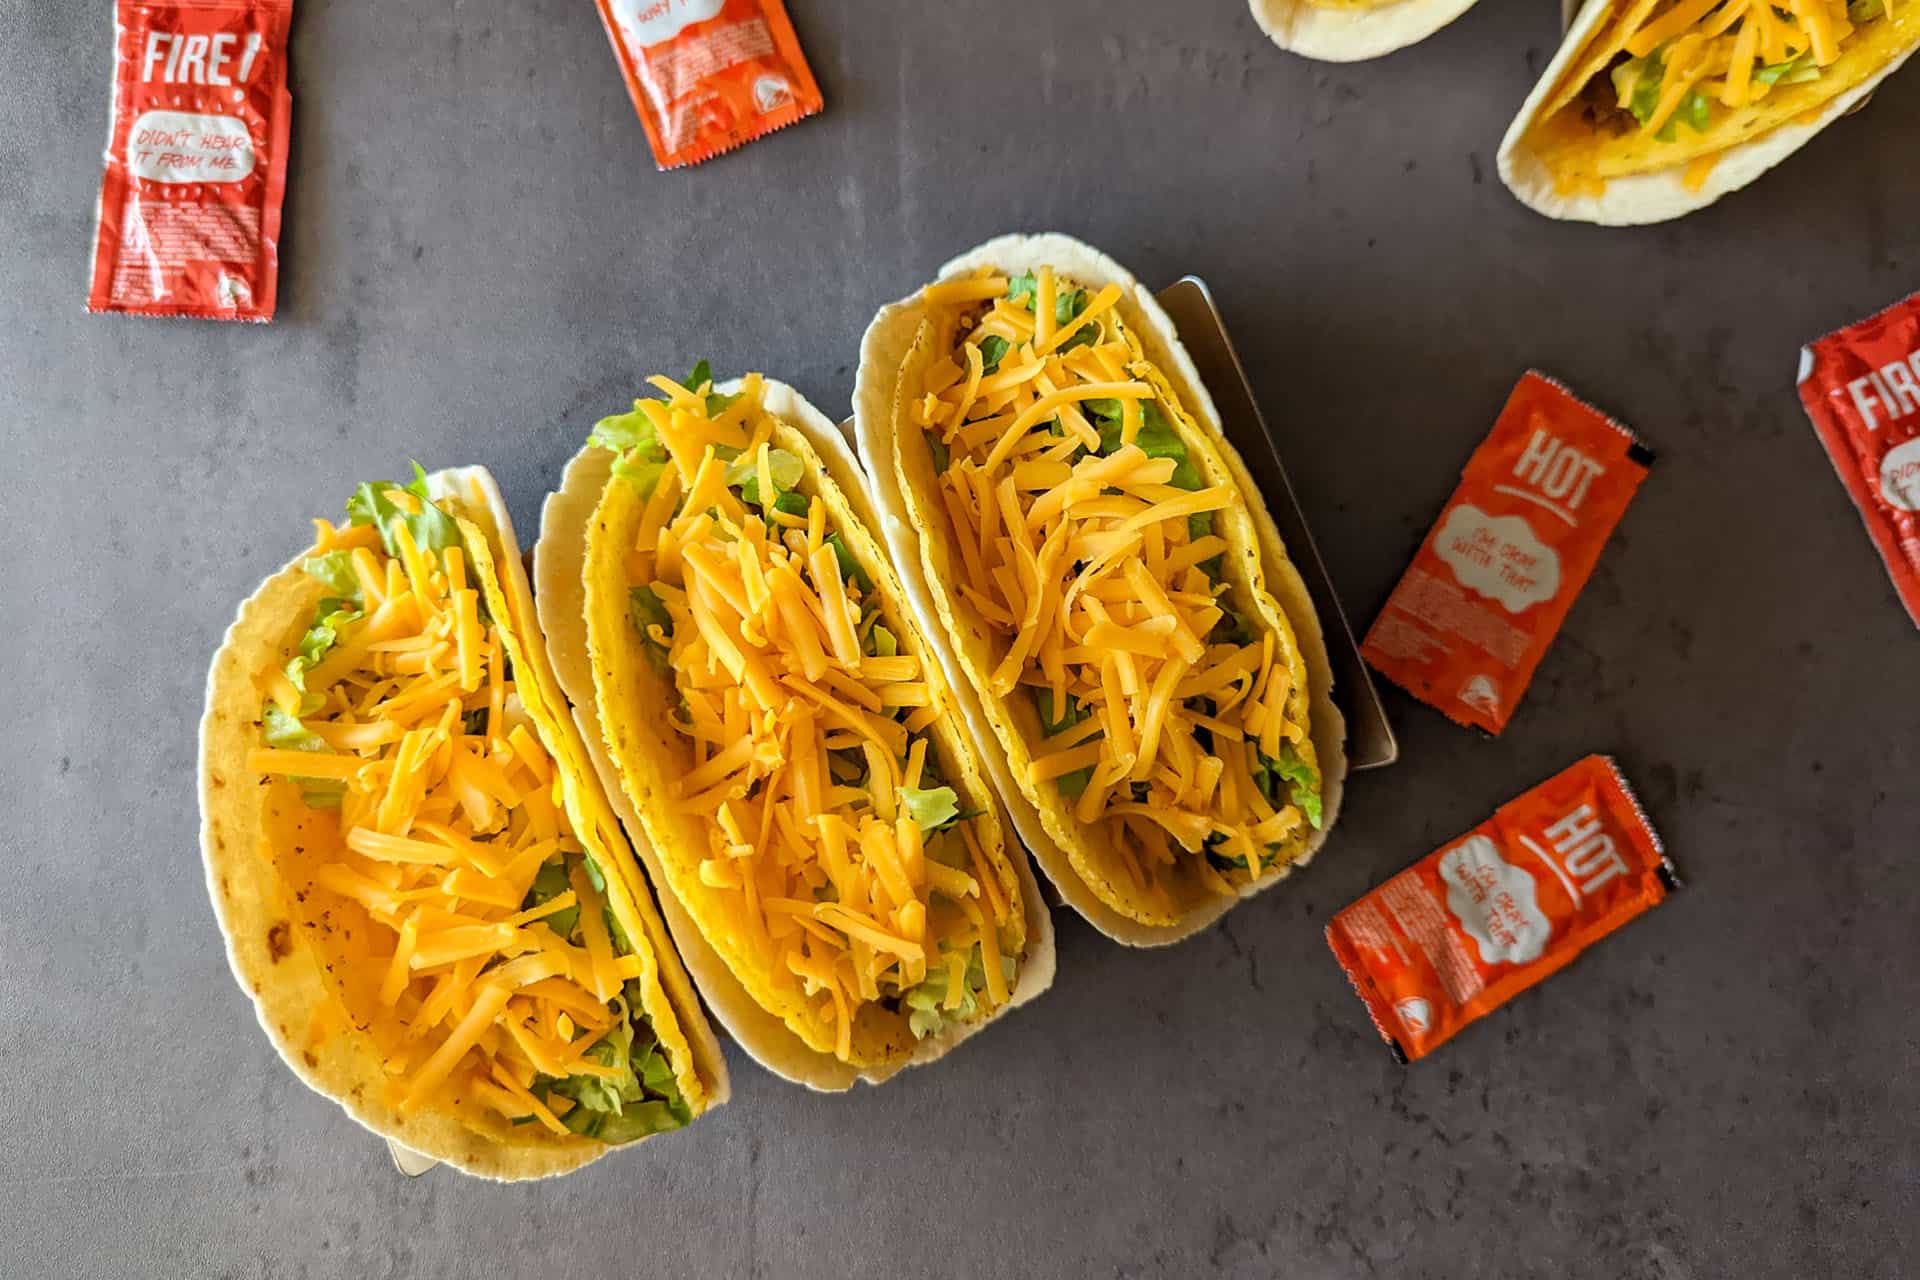 Taco bell copycat cheesy gordita crunch tacos with taco bell hot sauce